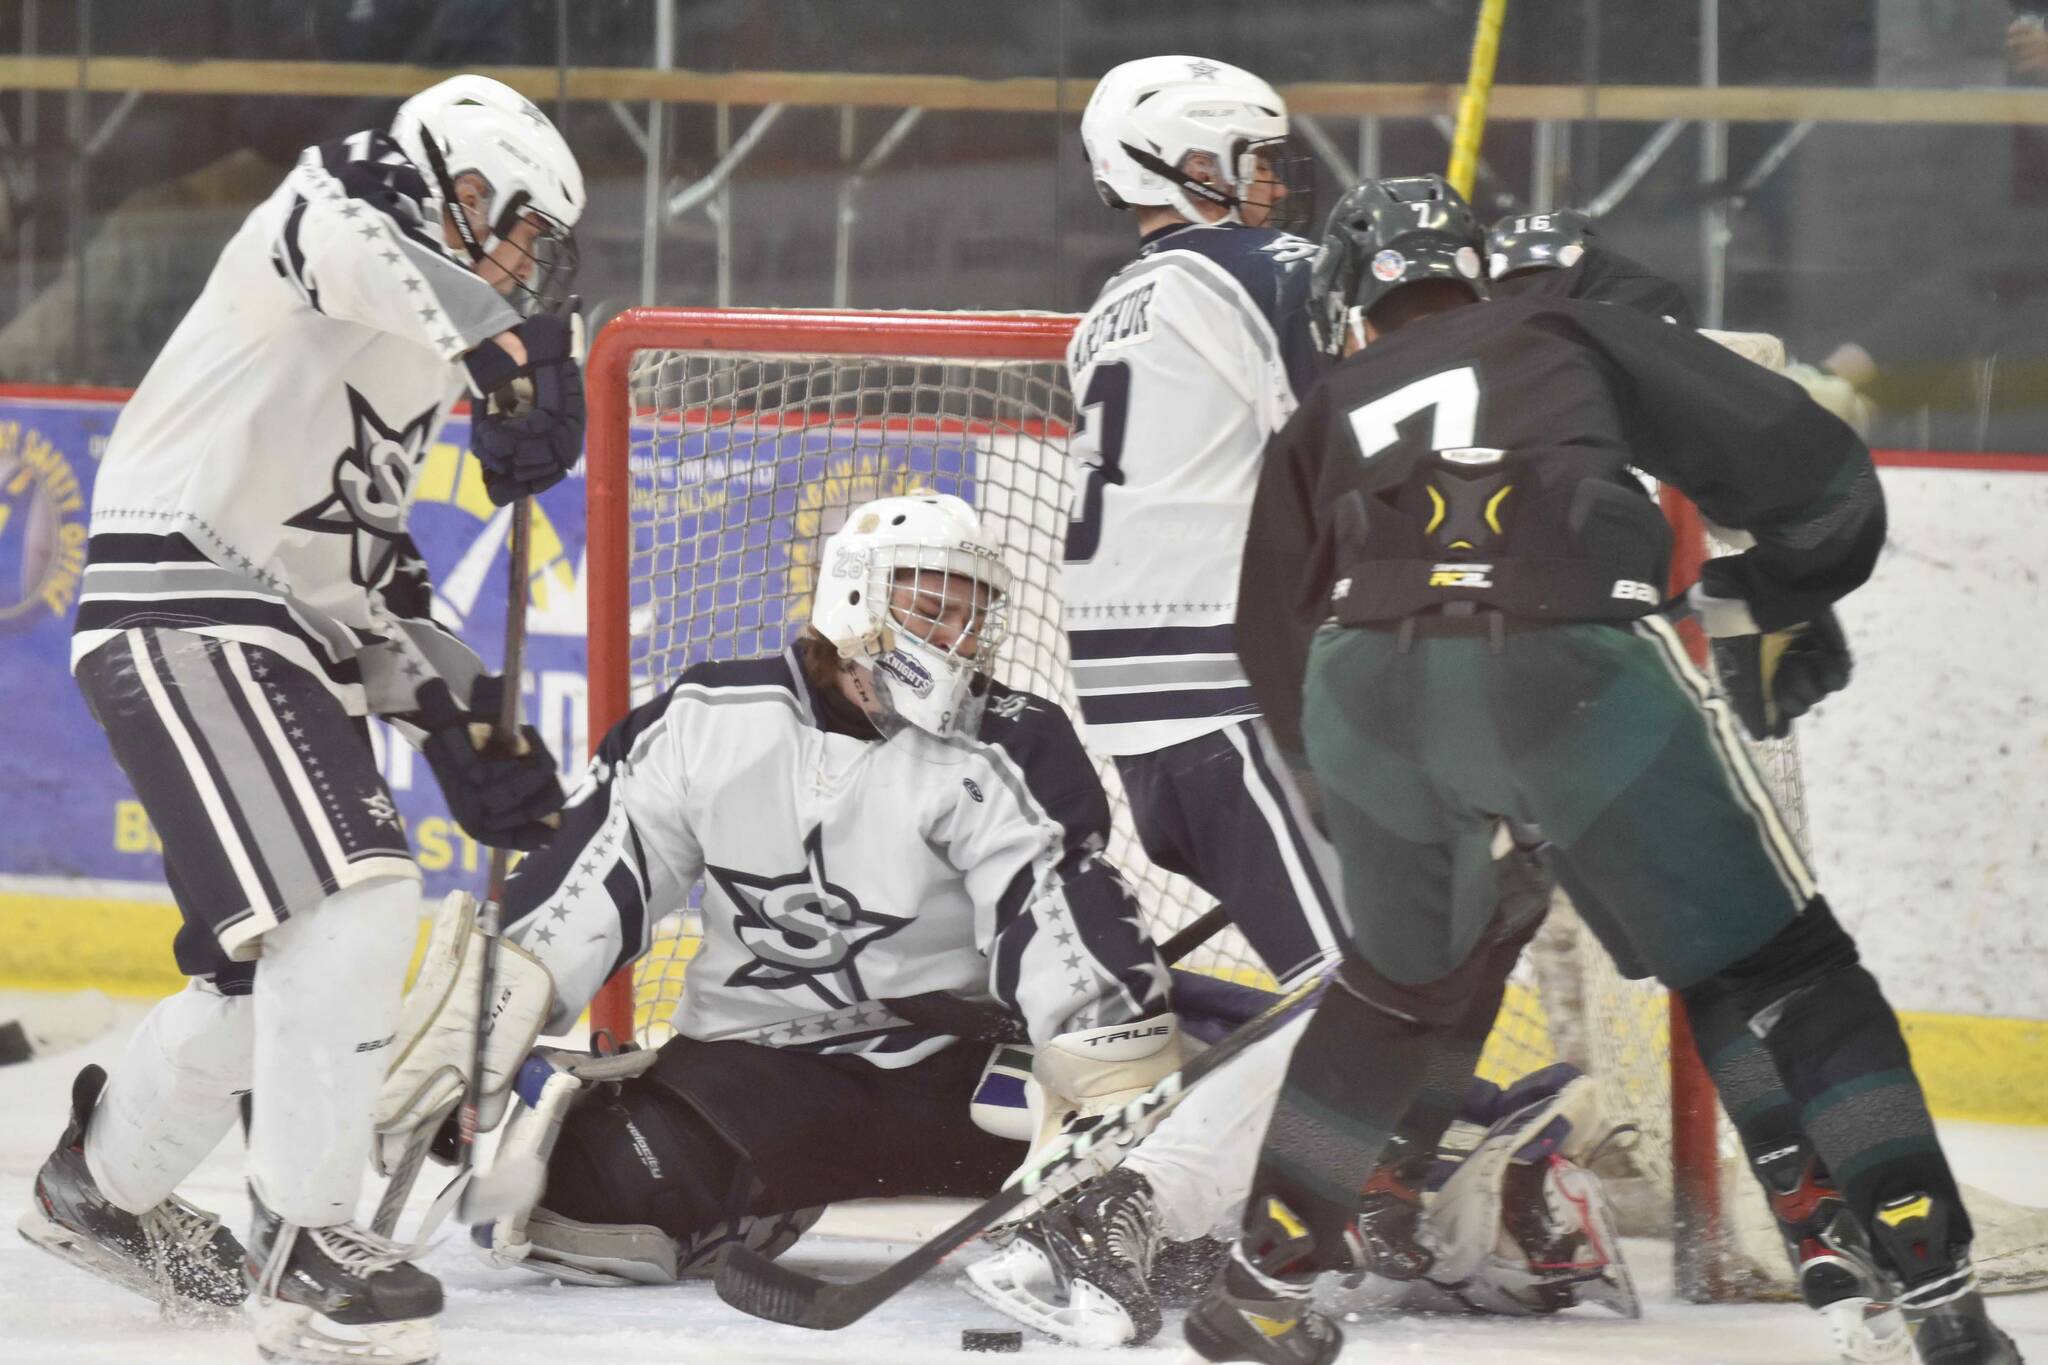 Soldotna goalie Jackson Purcell makes a save in front of defesenmen Aiden Burcham and Andrew Arthur and Colony's Jerad Hacker on Saturday, Jan. 7, 2023, at the Soldotna Regional Sports Complex in Soldotna, Alaska. (Photo by Jeff Helminiak/Peninsula Clarion)